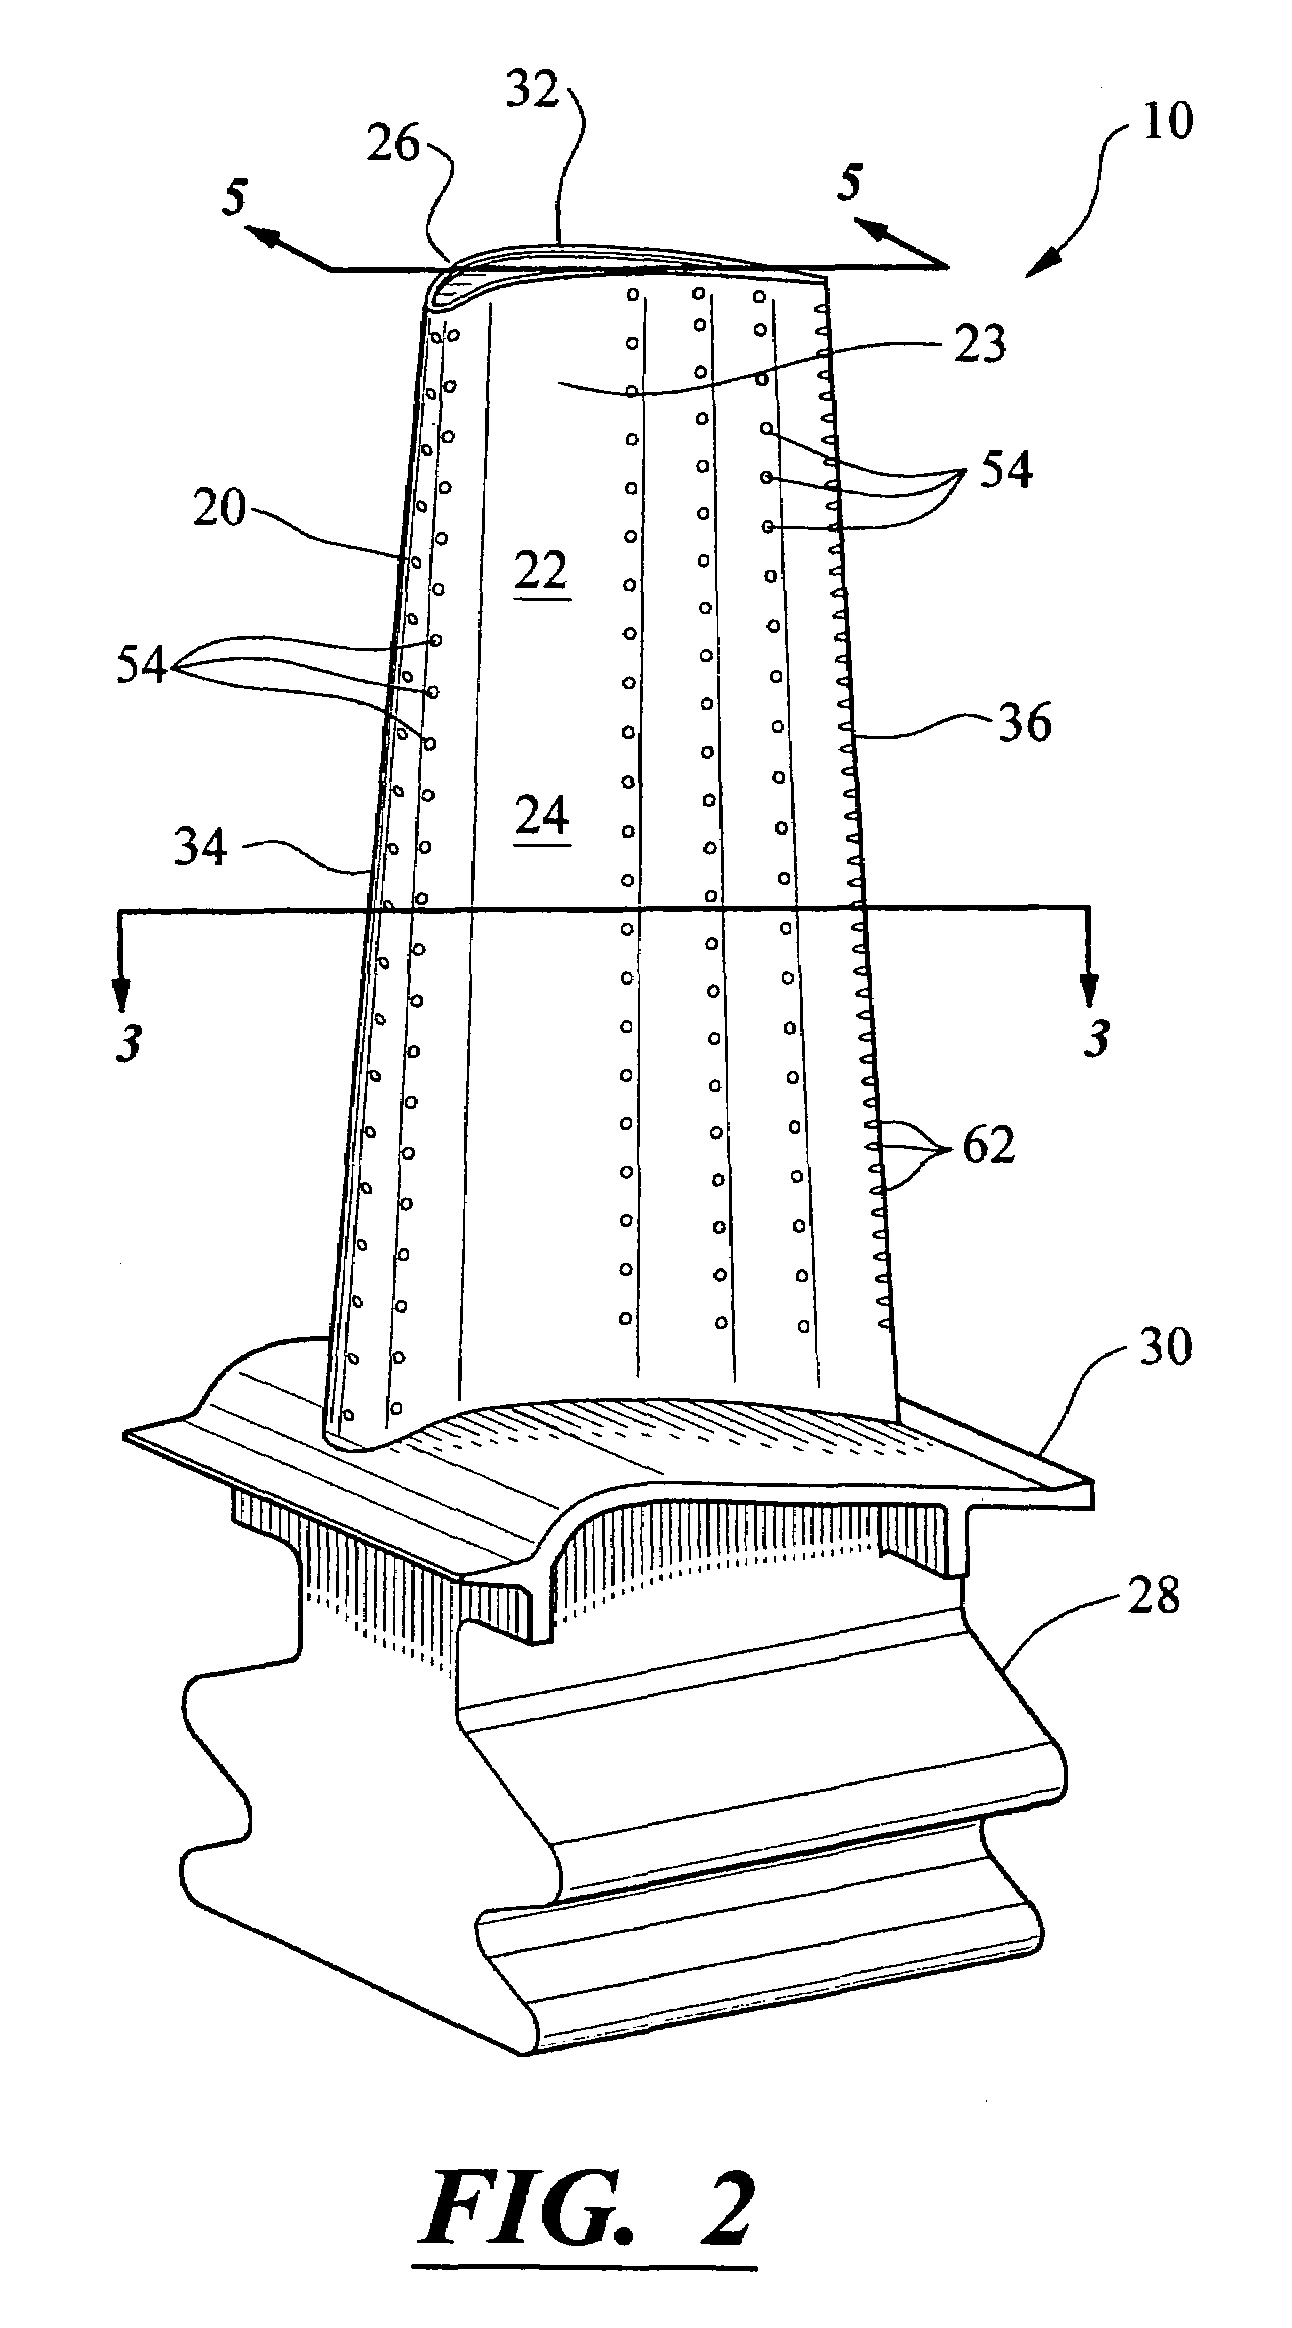 Turbine airfoil with counter-flow serpentine channels